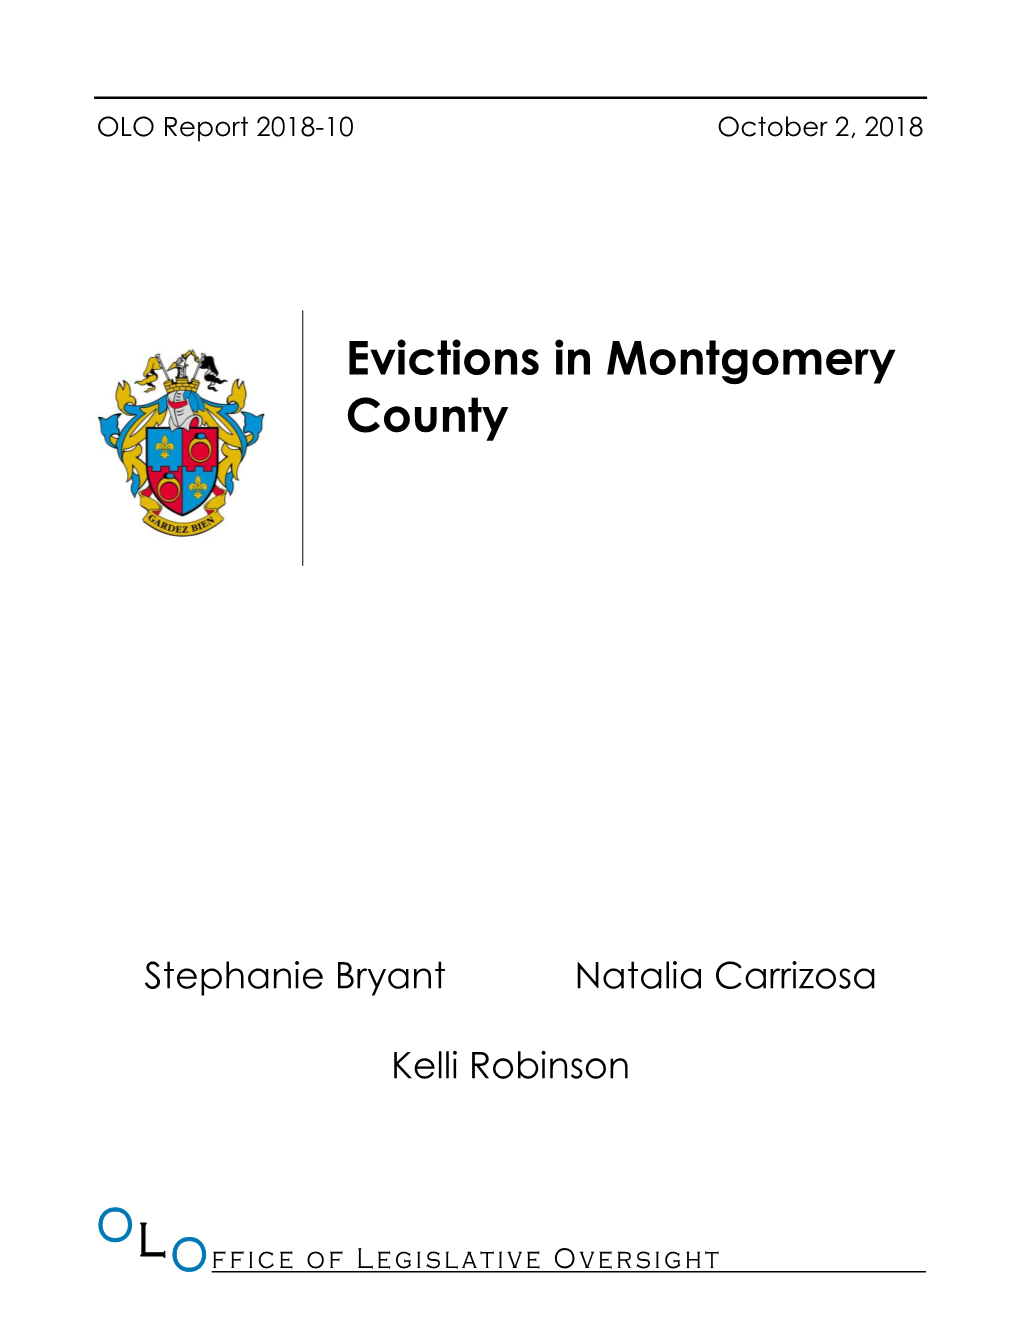 Evictions in Montgomery County